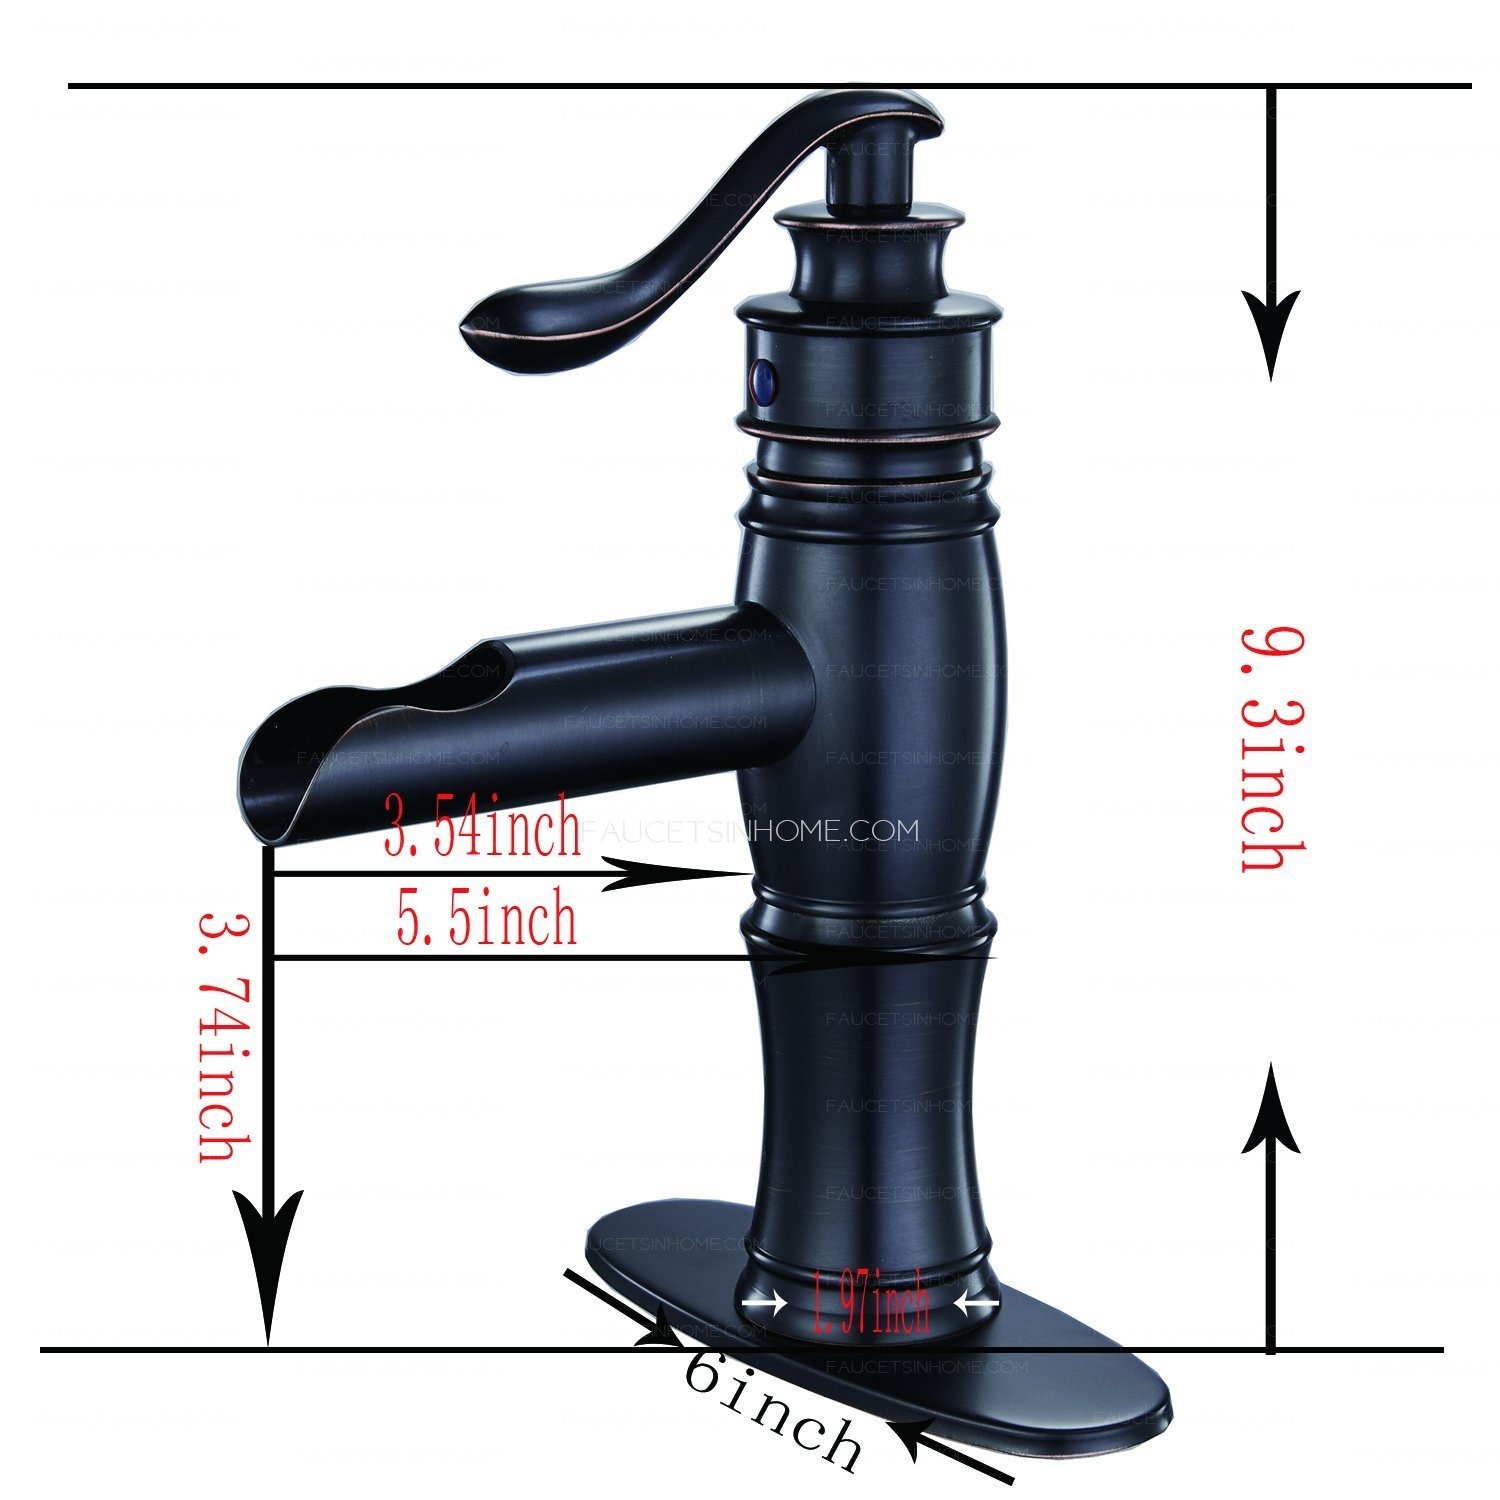 Oil Rubbed Bronze Single Lever Waterfall Bathroom Faucet Mixer Tap